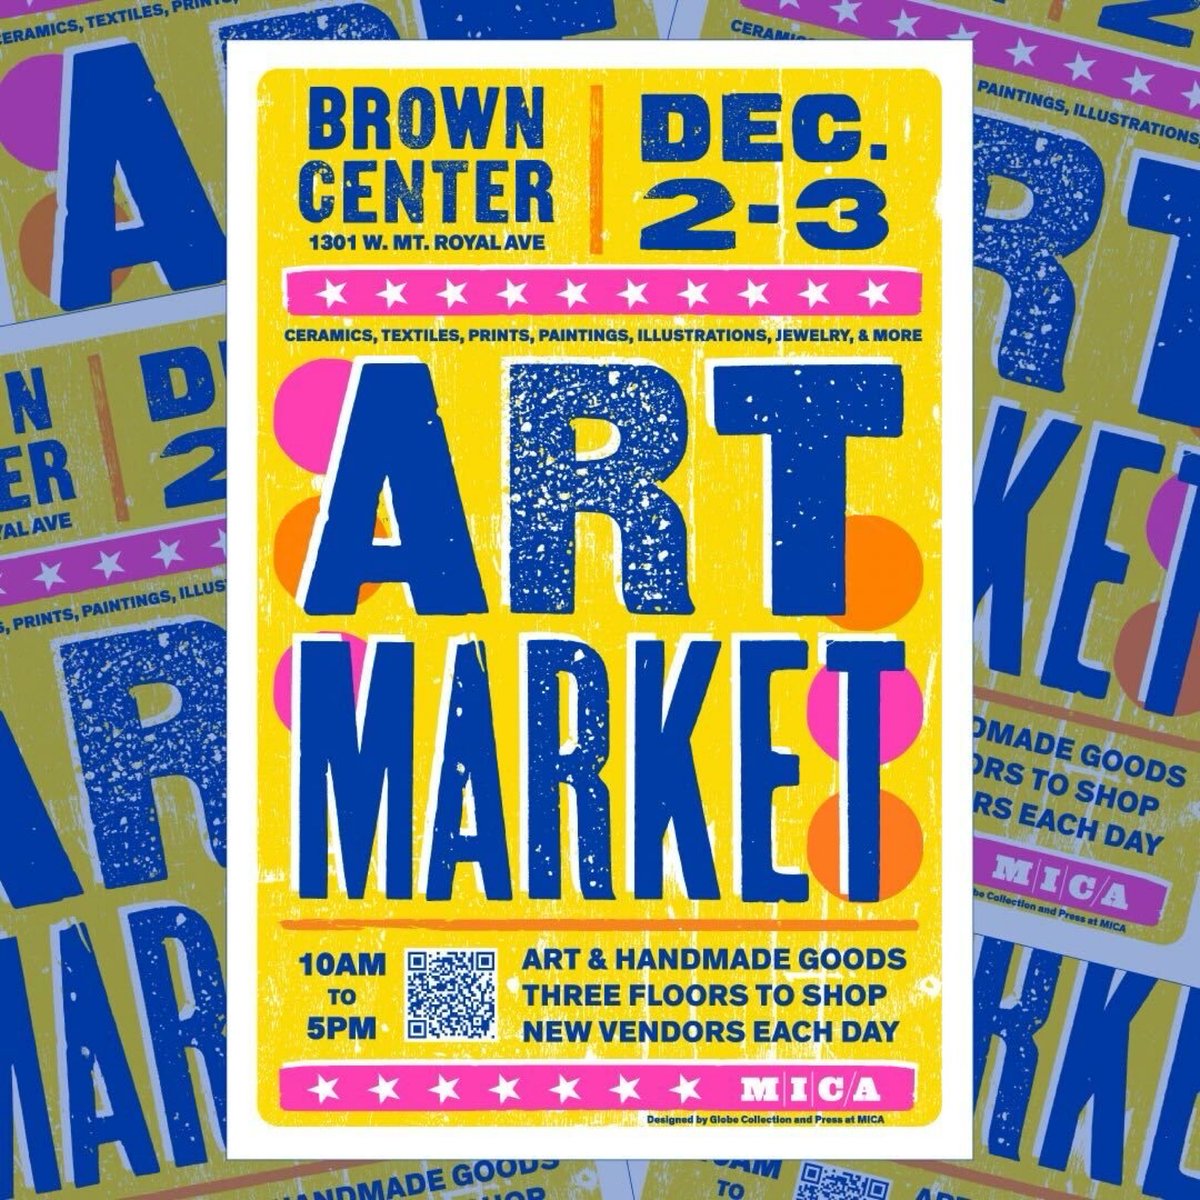 #MICAArtMarket takes place this Saturday and Sunday from 10 a.m. to 5 p.m. in Brown Center. Hundreds of unique items will be available for purchase. See you there! Full details: mica.edu/annual-events-… #MICAmade